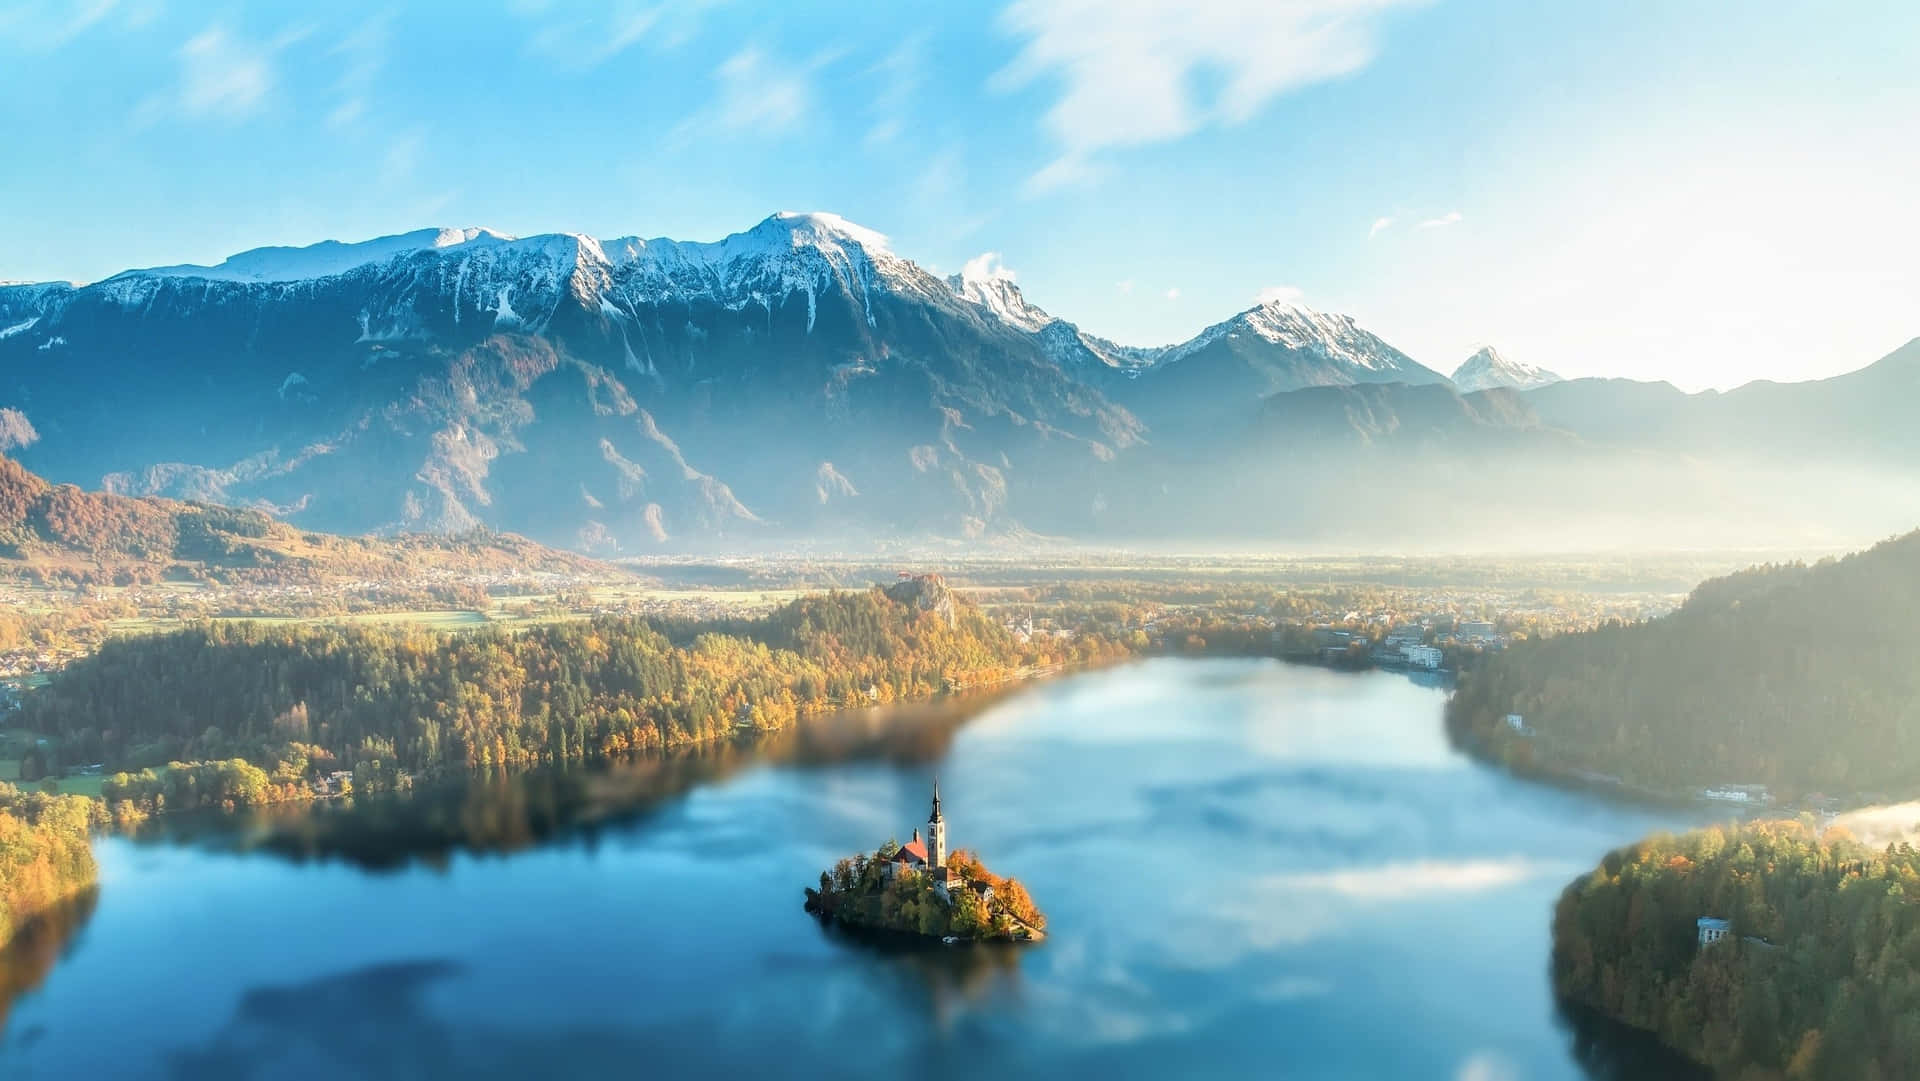 A stunning view of the Julian Alps peak with Lake Bled in the background Wallpaper